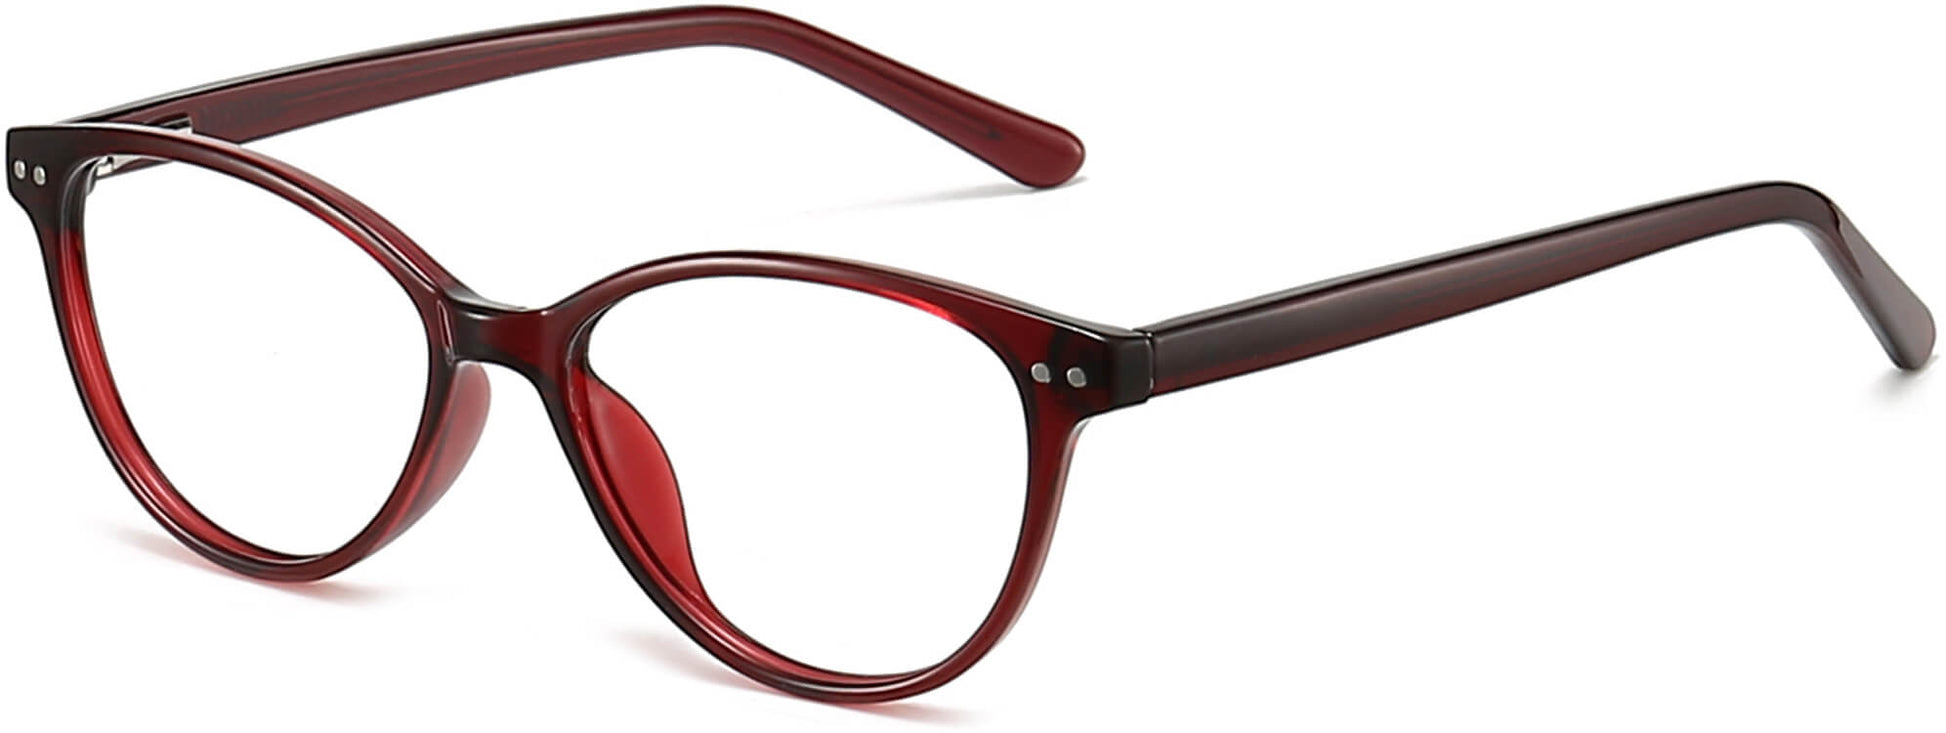 Cesar Cateye Red Eyeglasses from ANRRI, angle view